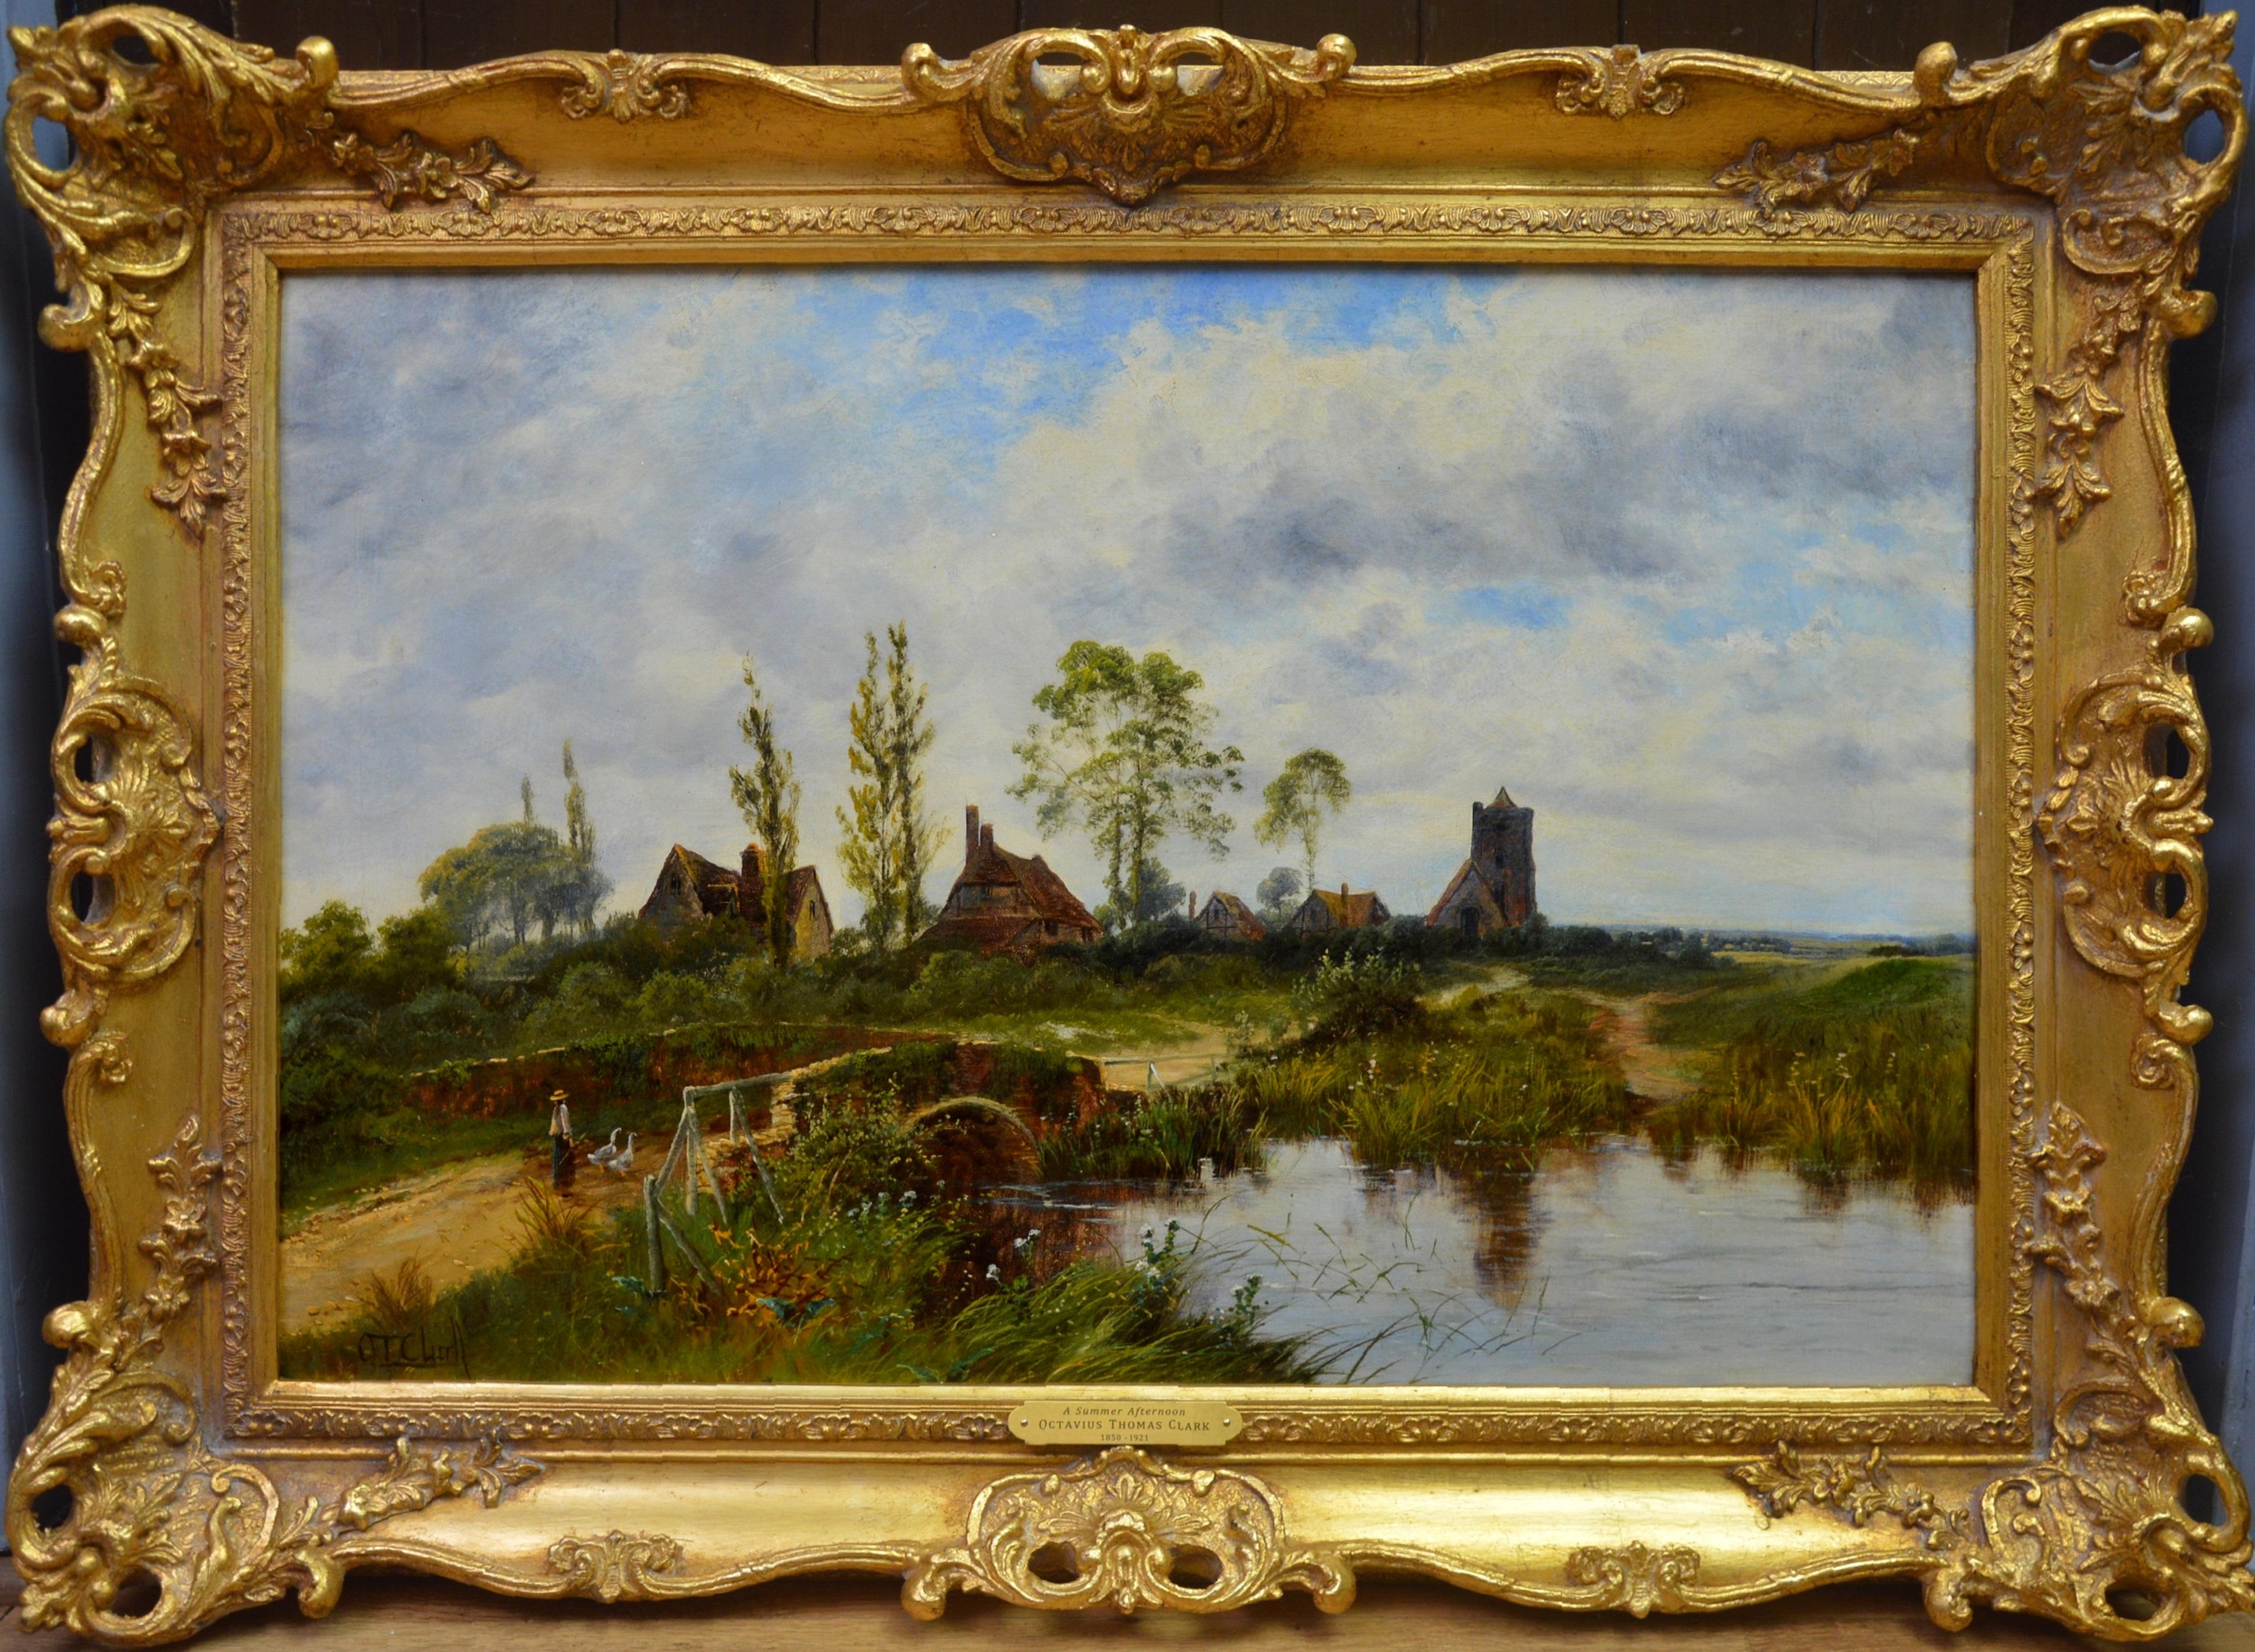 Octavius Thomas Clark Figurative Painting - A Summer Afternoon - 19th Century English River Landscape Oil Painting 